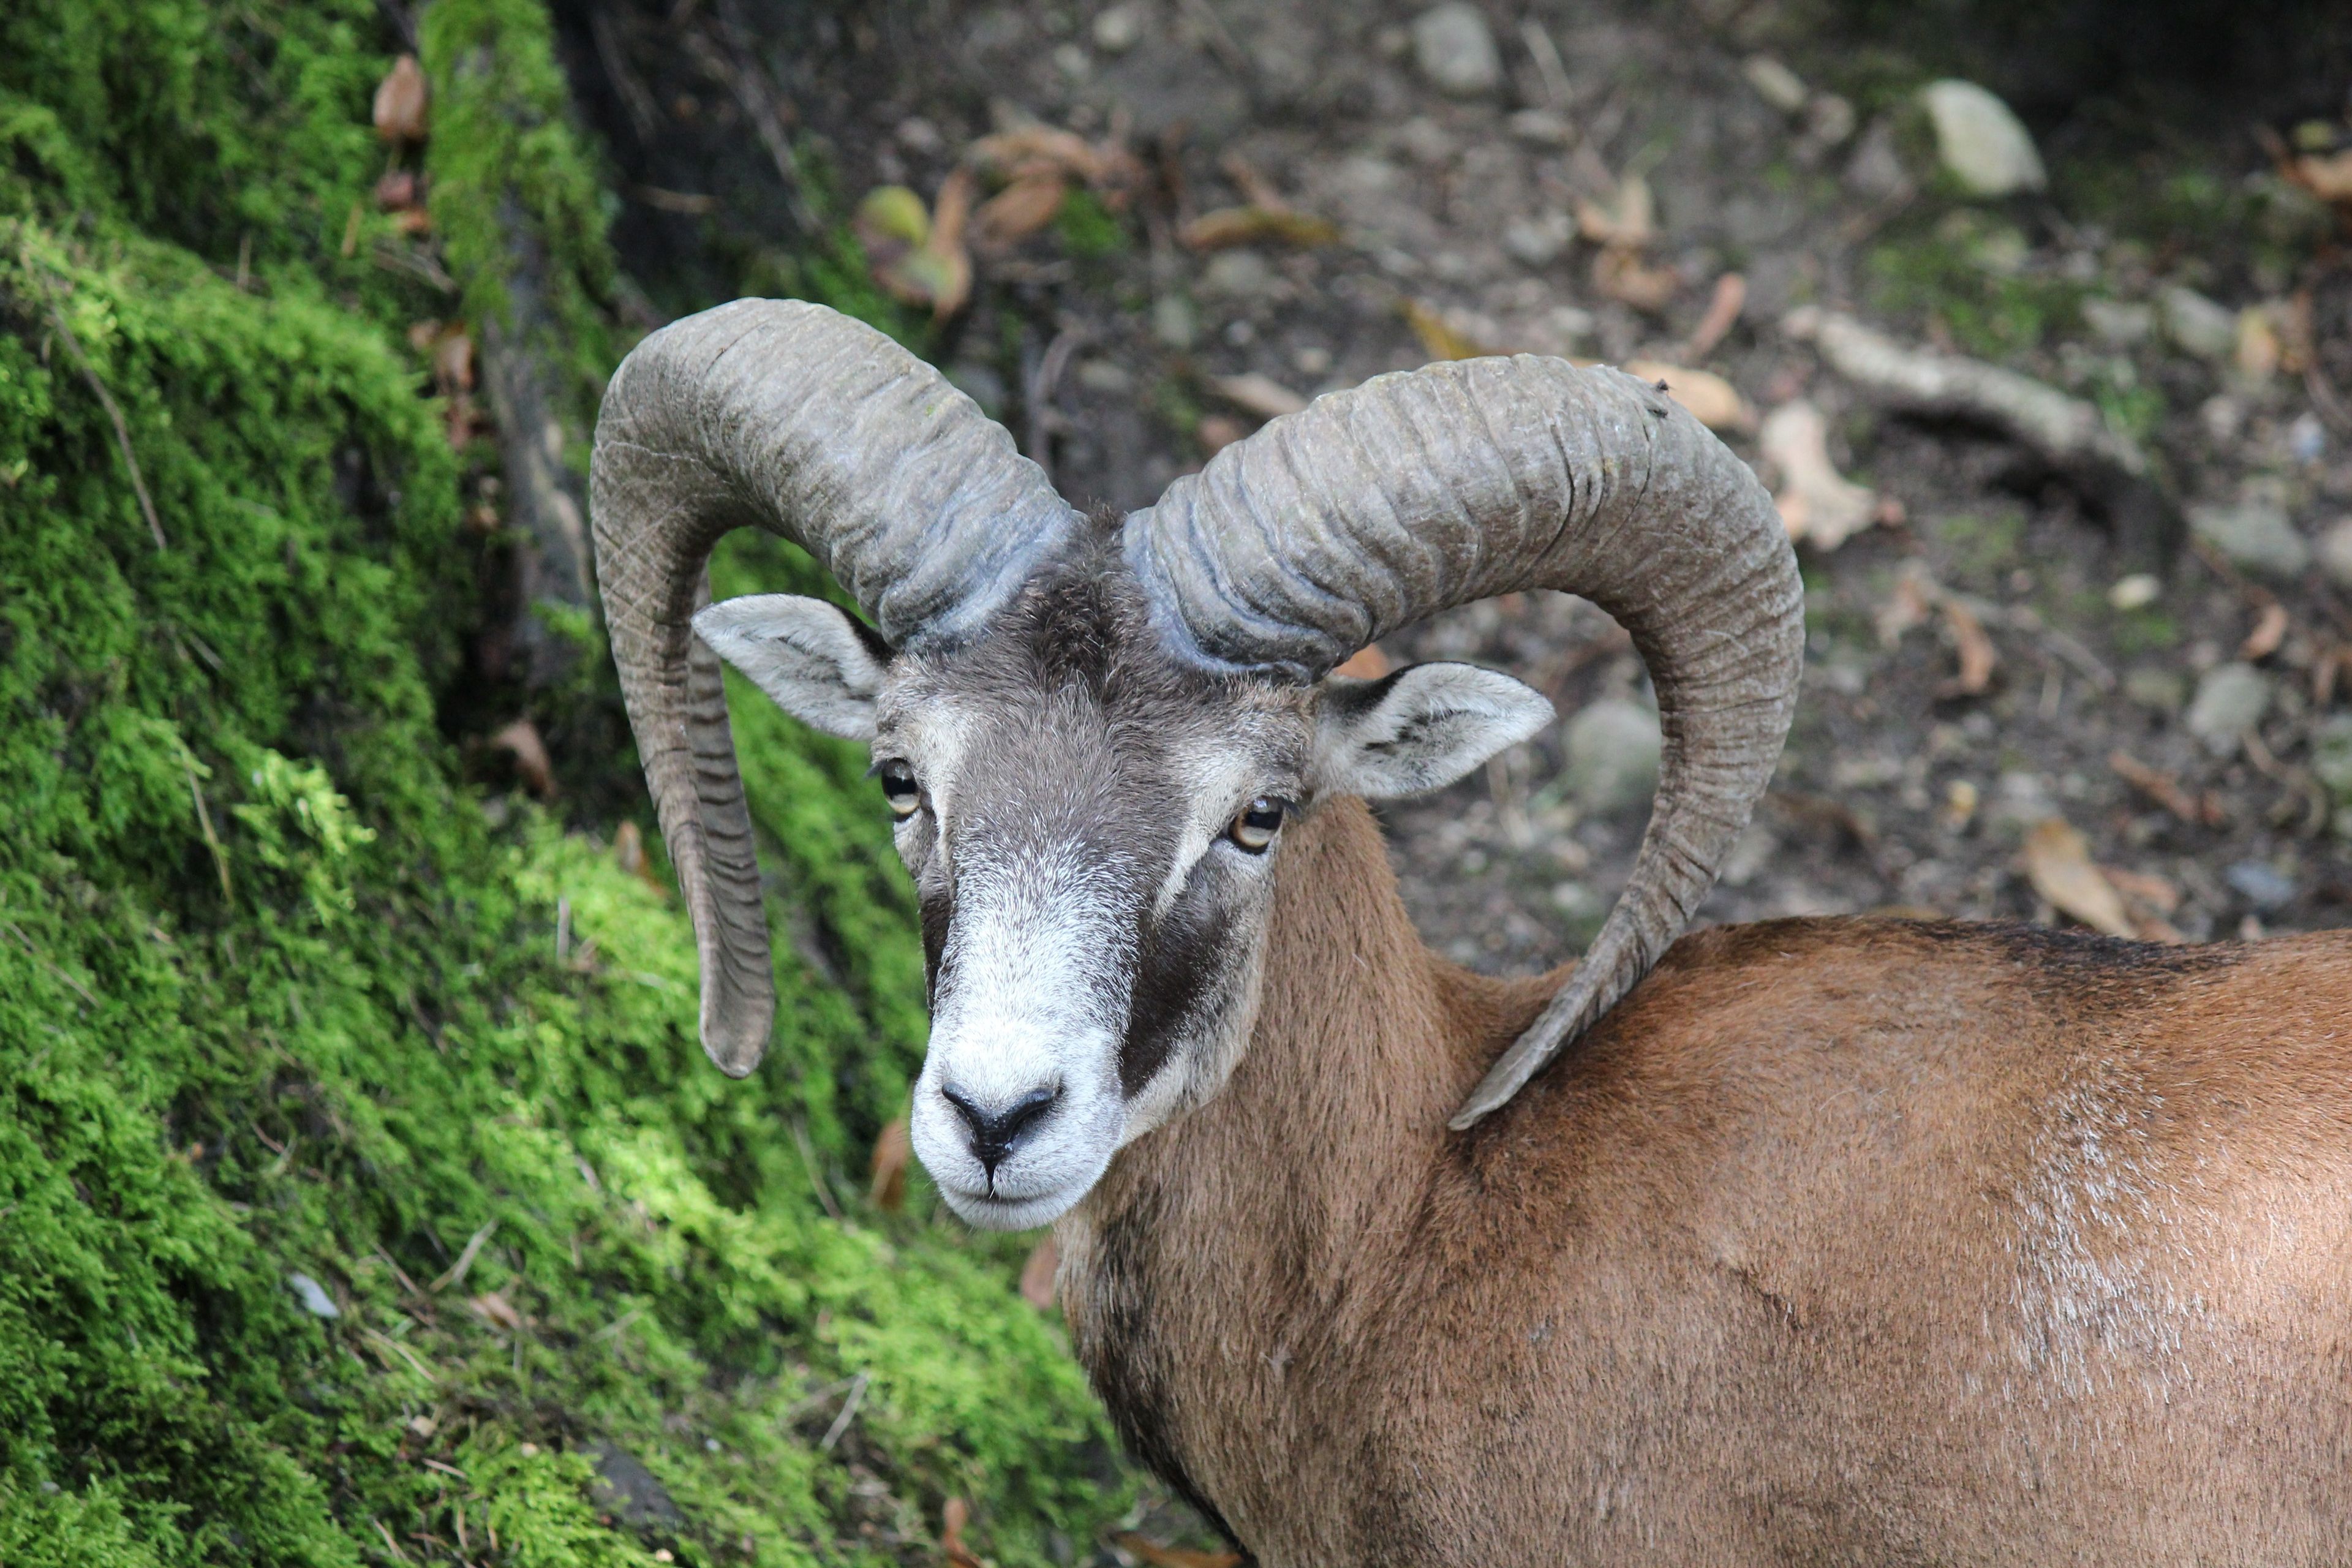 A portrait of a mouflon, which is a subspecies group of wild sheep.